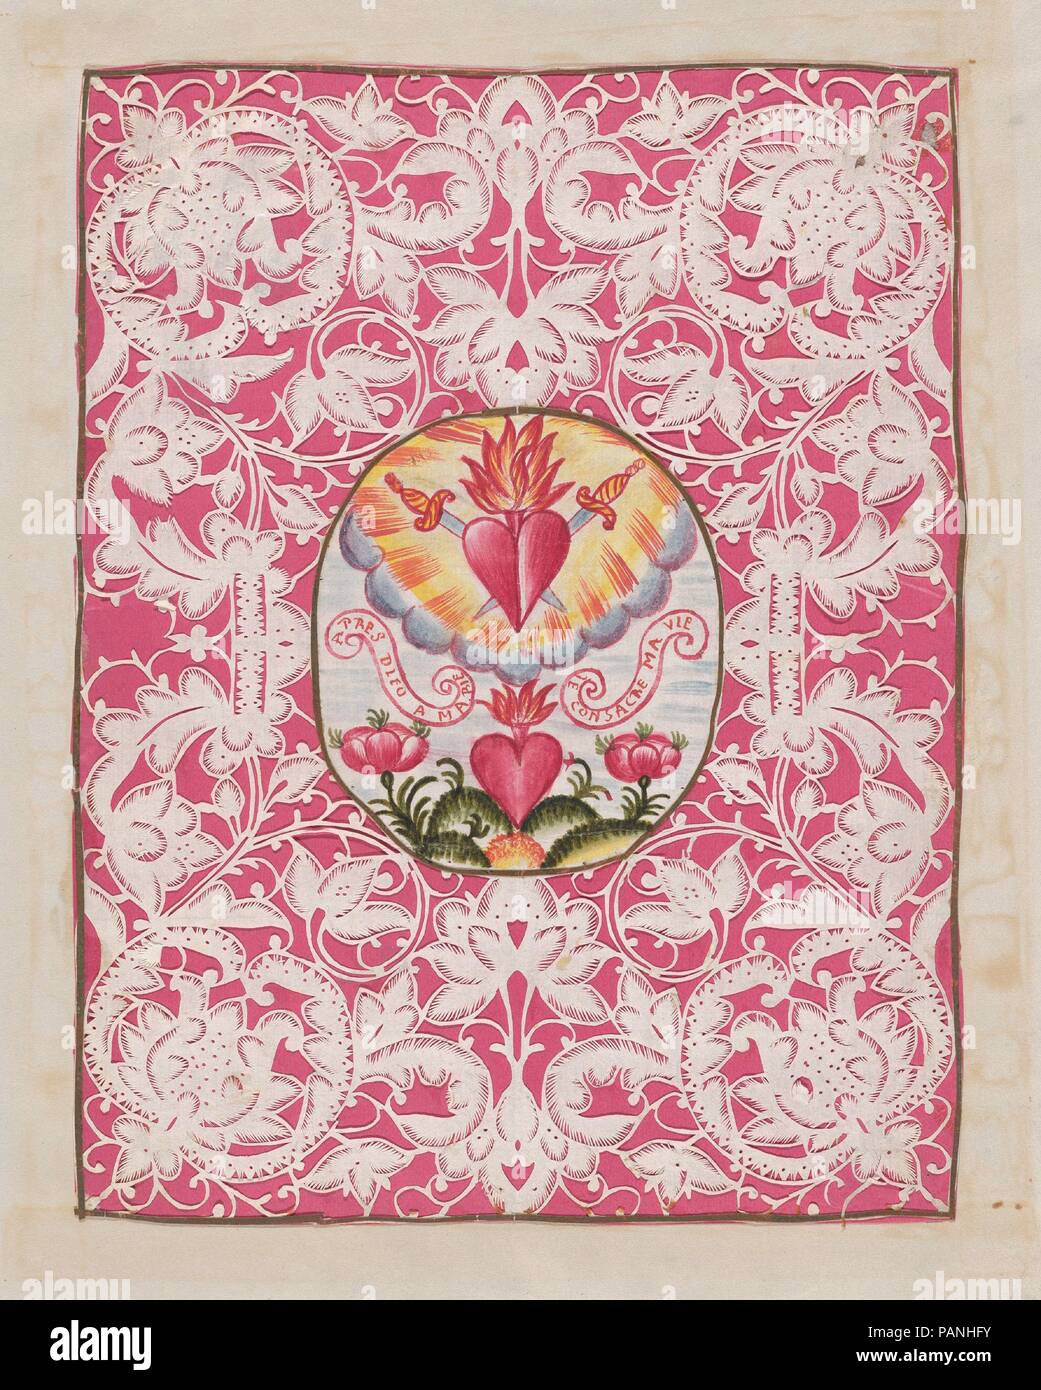 Canivet, or Devotional. Artist: Anonymous, Flemish, 18th century. Dimensions: Sheet: 8 1/16 × 6 5/16 in. (20.5 × 16 cm). Date: 18th century.  Vellum is delicately knife-cut to emulate fine lace in this Devotional, also known as Canivet. This is a religious precursor of the Valentine, which would have been given as a gift to honor a special occasion, such as birth, death, communion, or marriage.  The cut paper is a background for the central, painted image, which shows crossed swords impaling a flaming heart -- which is amid clouds. Another flaming heart appears to grow from the earth with two  Stock Photo